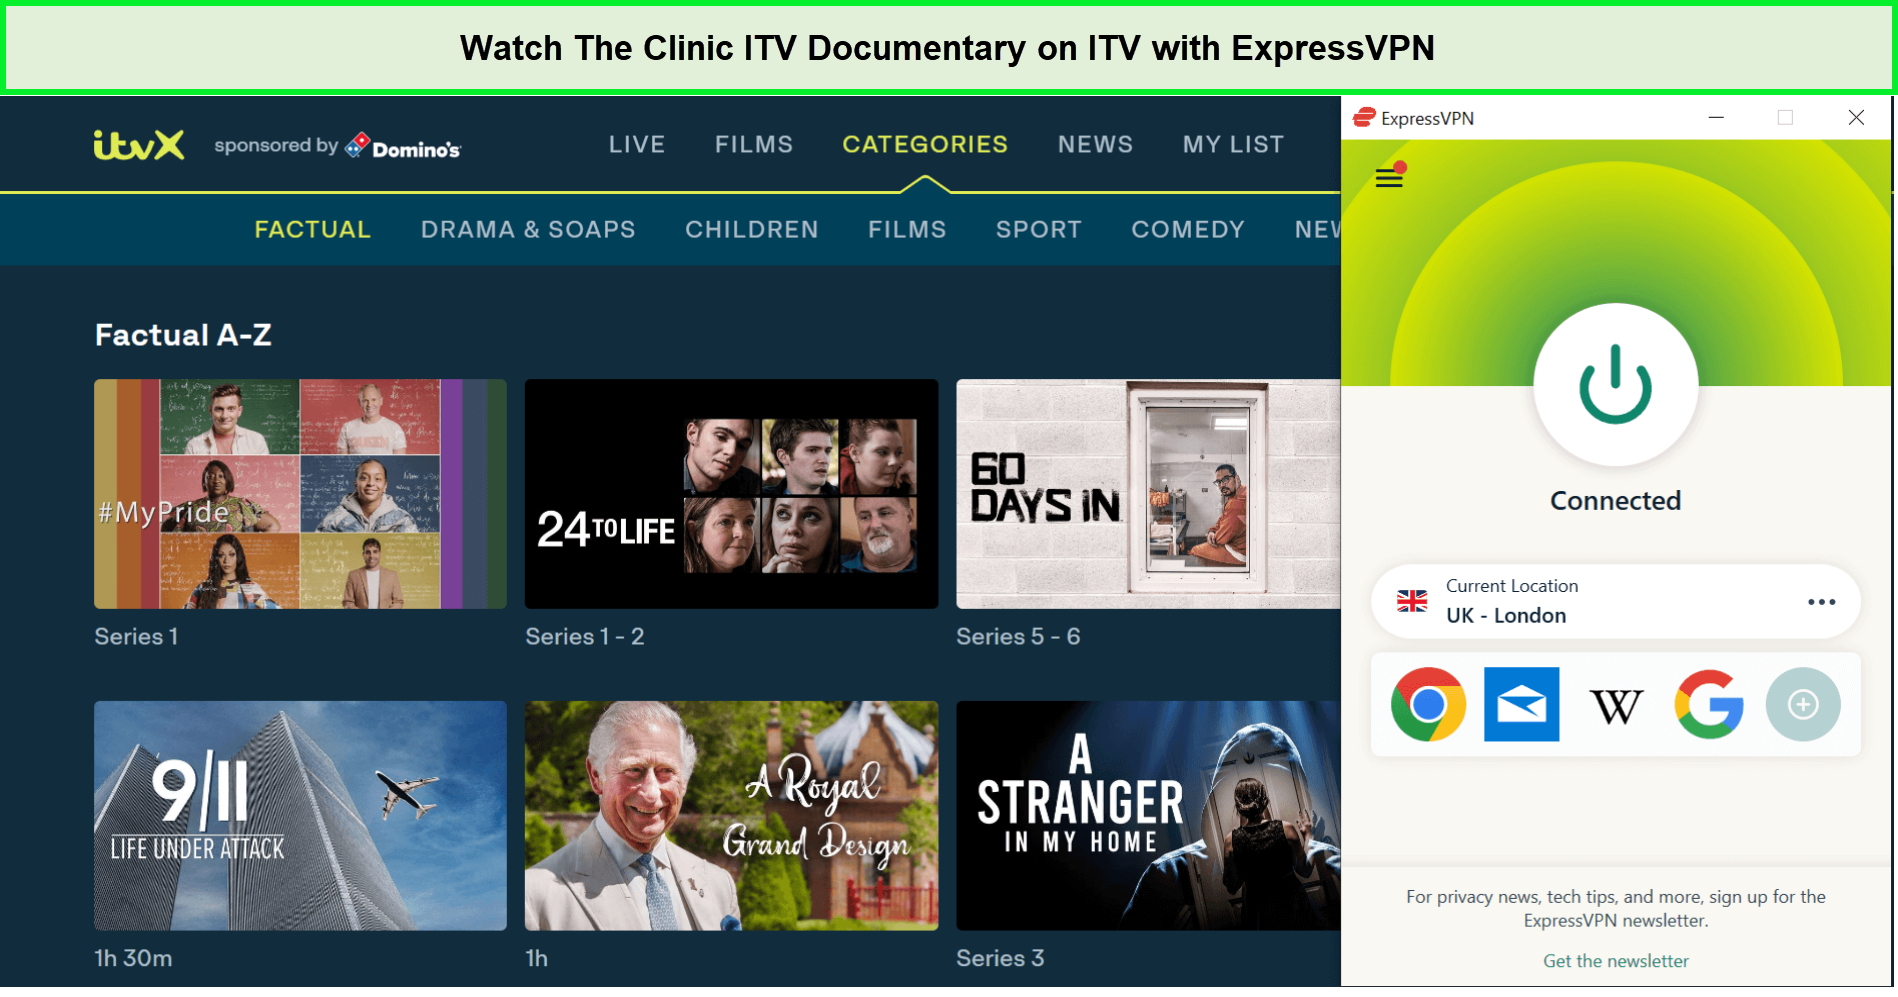 Watch-The-Clinic-ITV-Documentary-in-Japan-on-ITV-with-ExpressVPN.